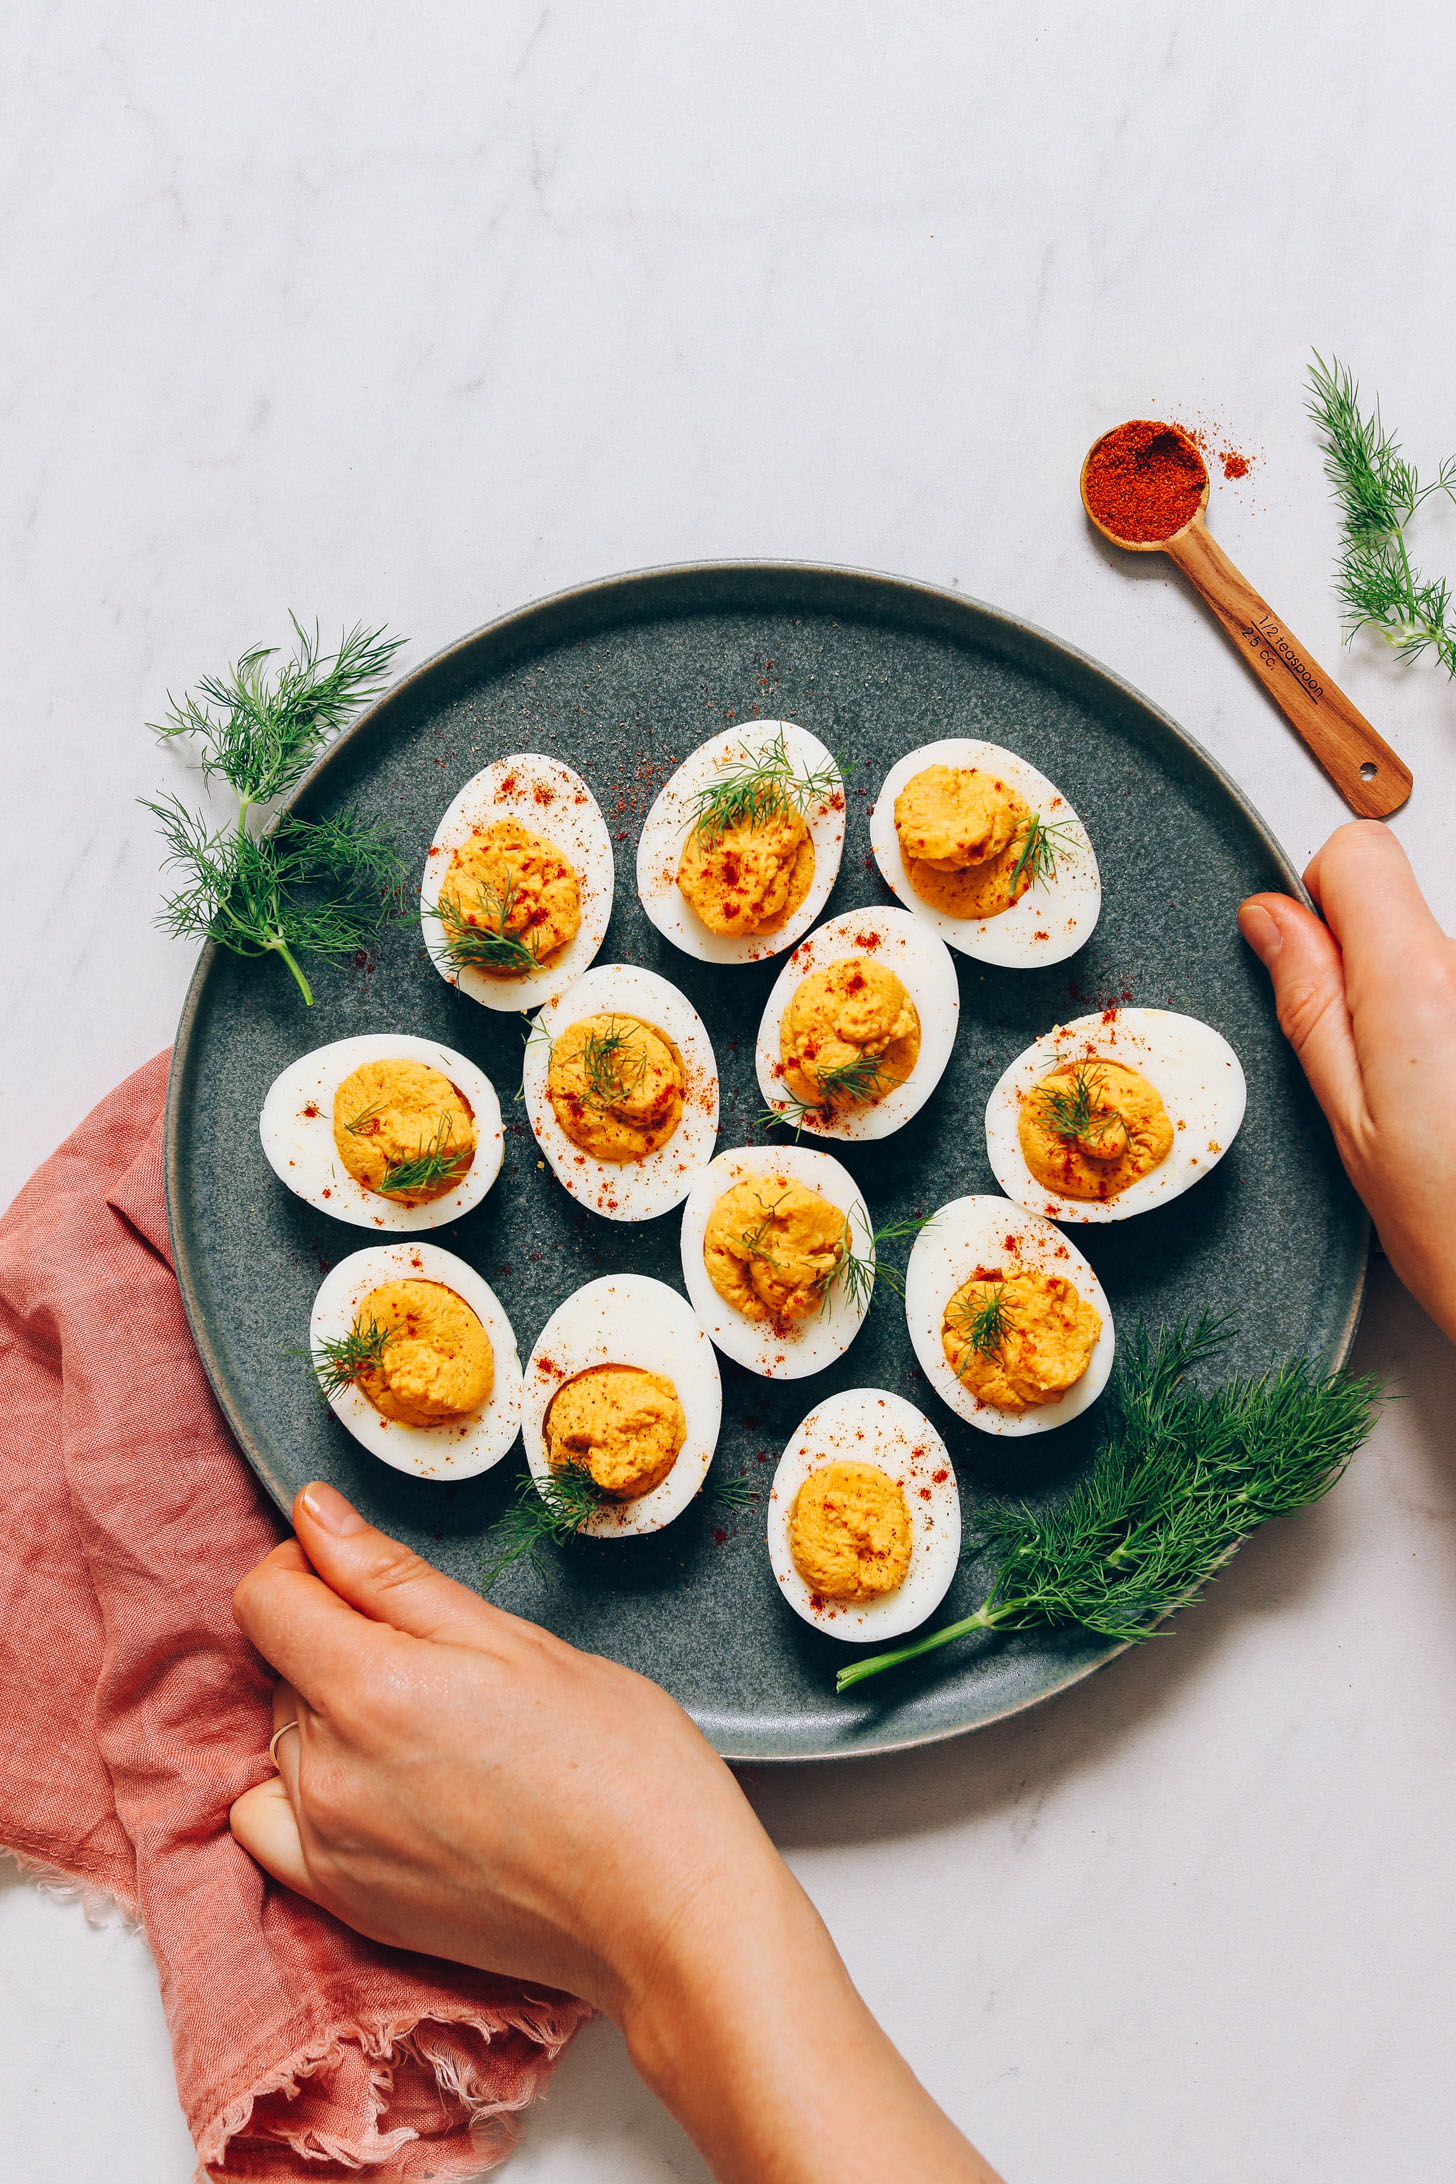 Plater of Dairy-Free Deviled Eggs made without mayonnaise